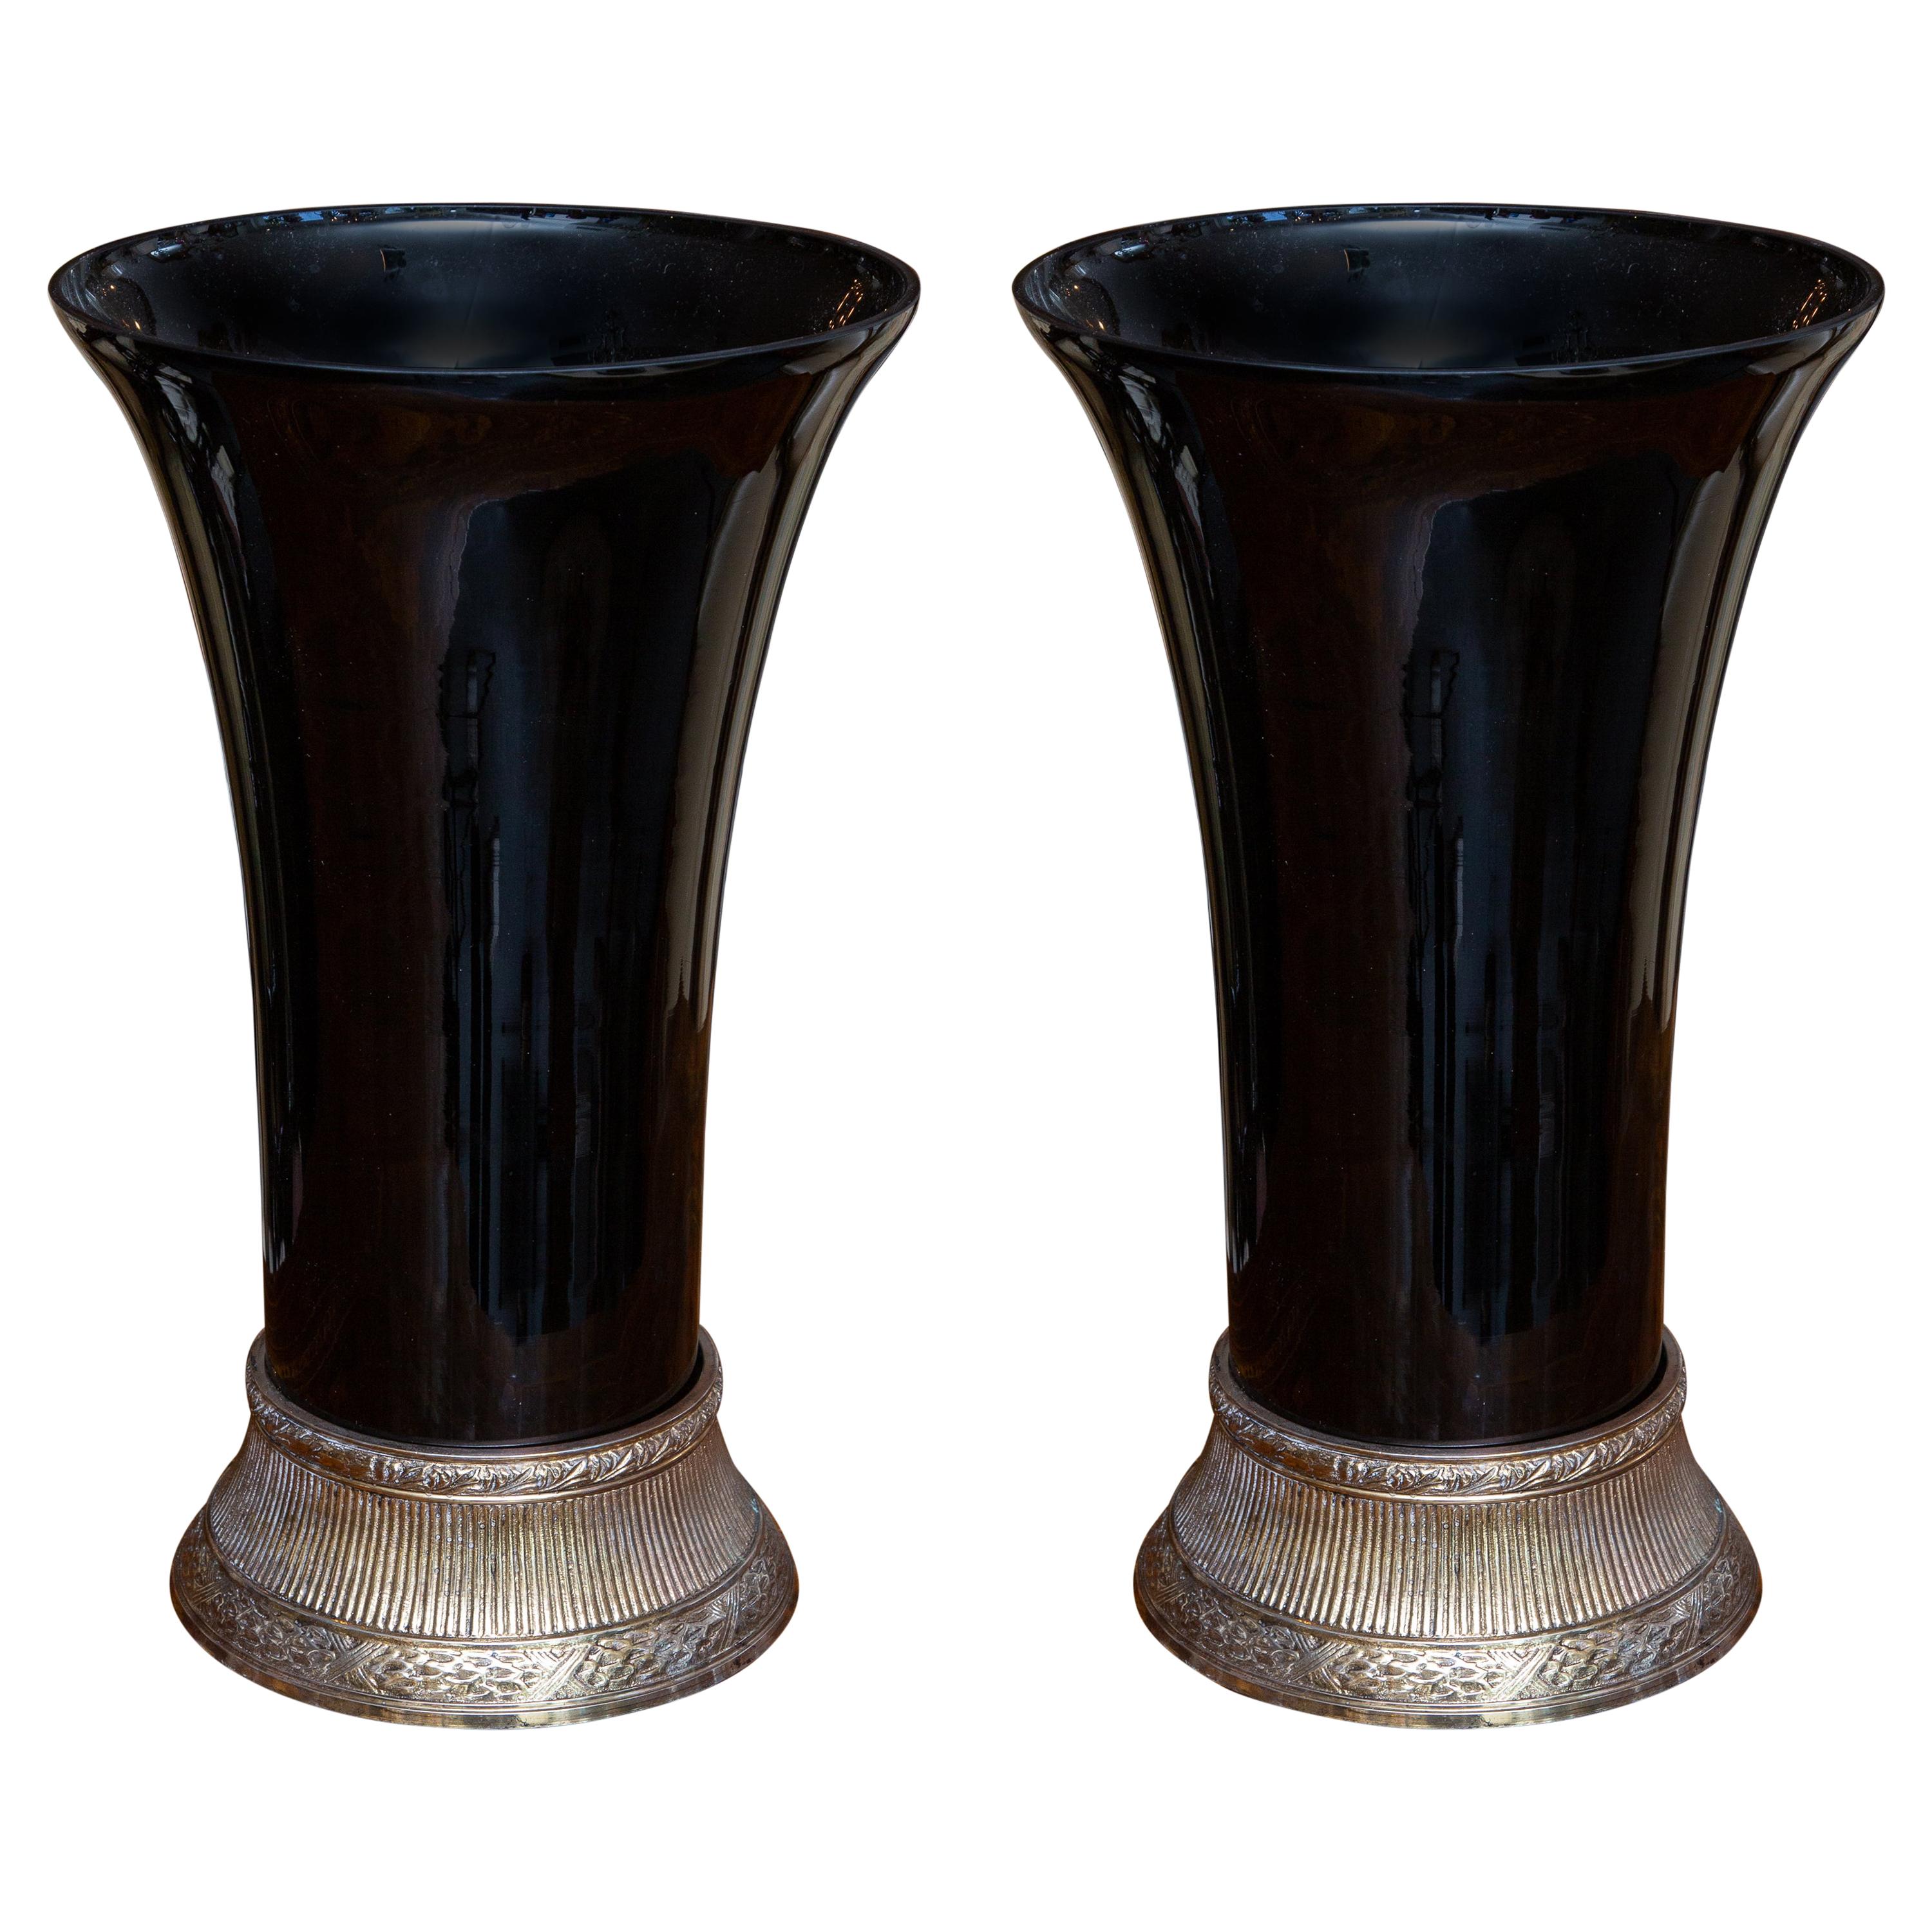 Near-Pair of Art Deco Style Black Vases on Stand